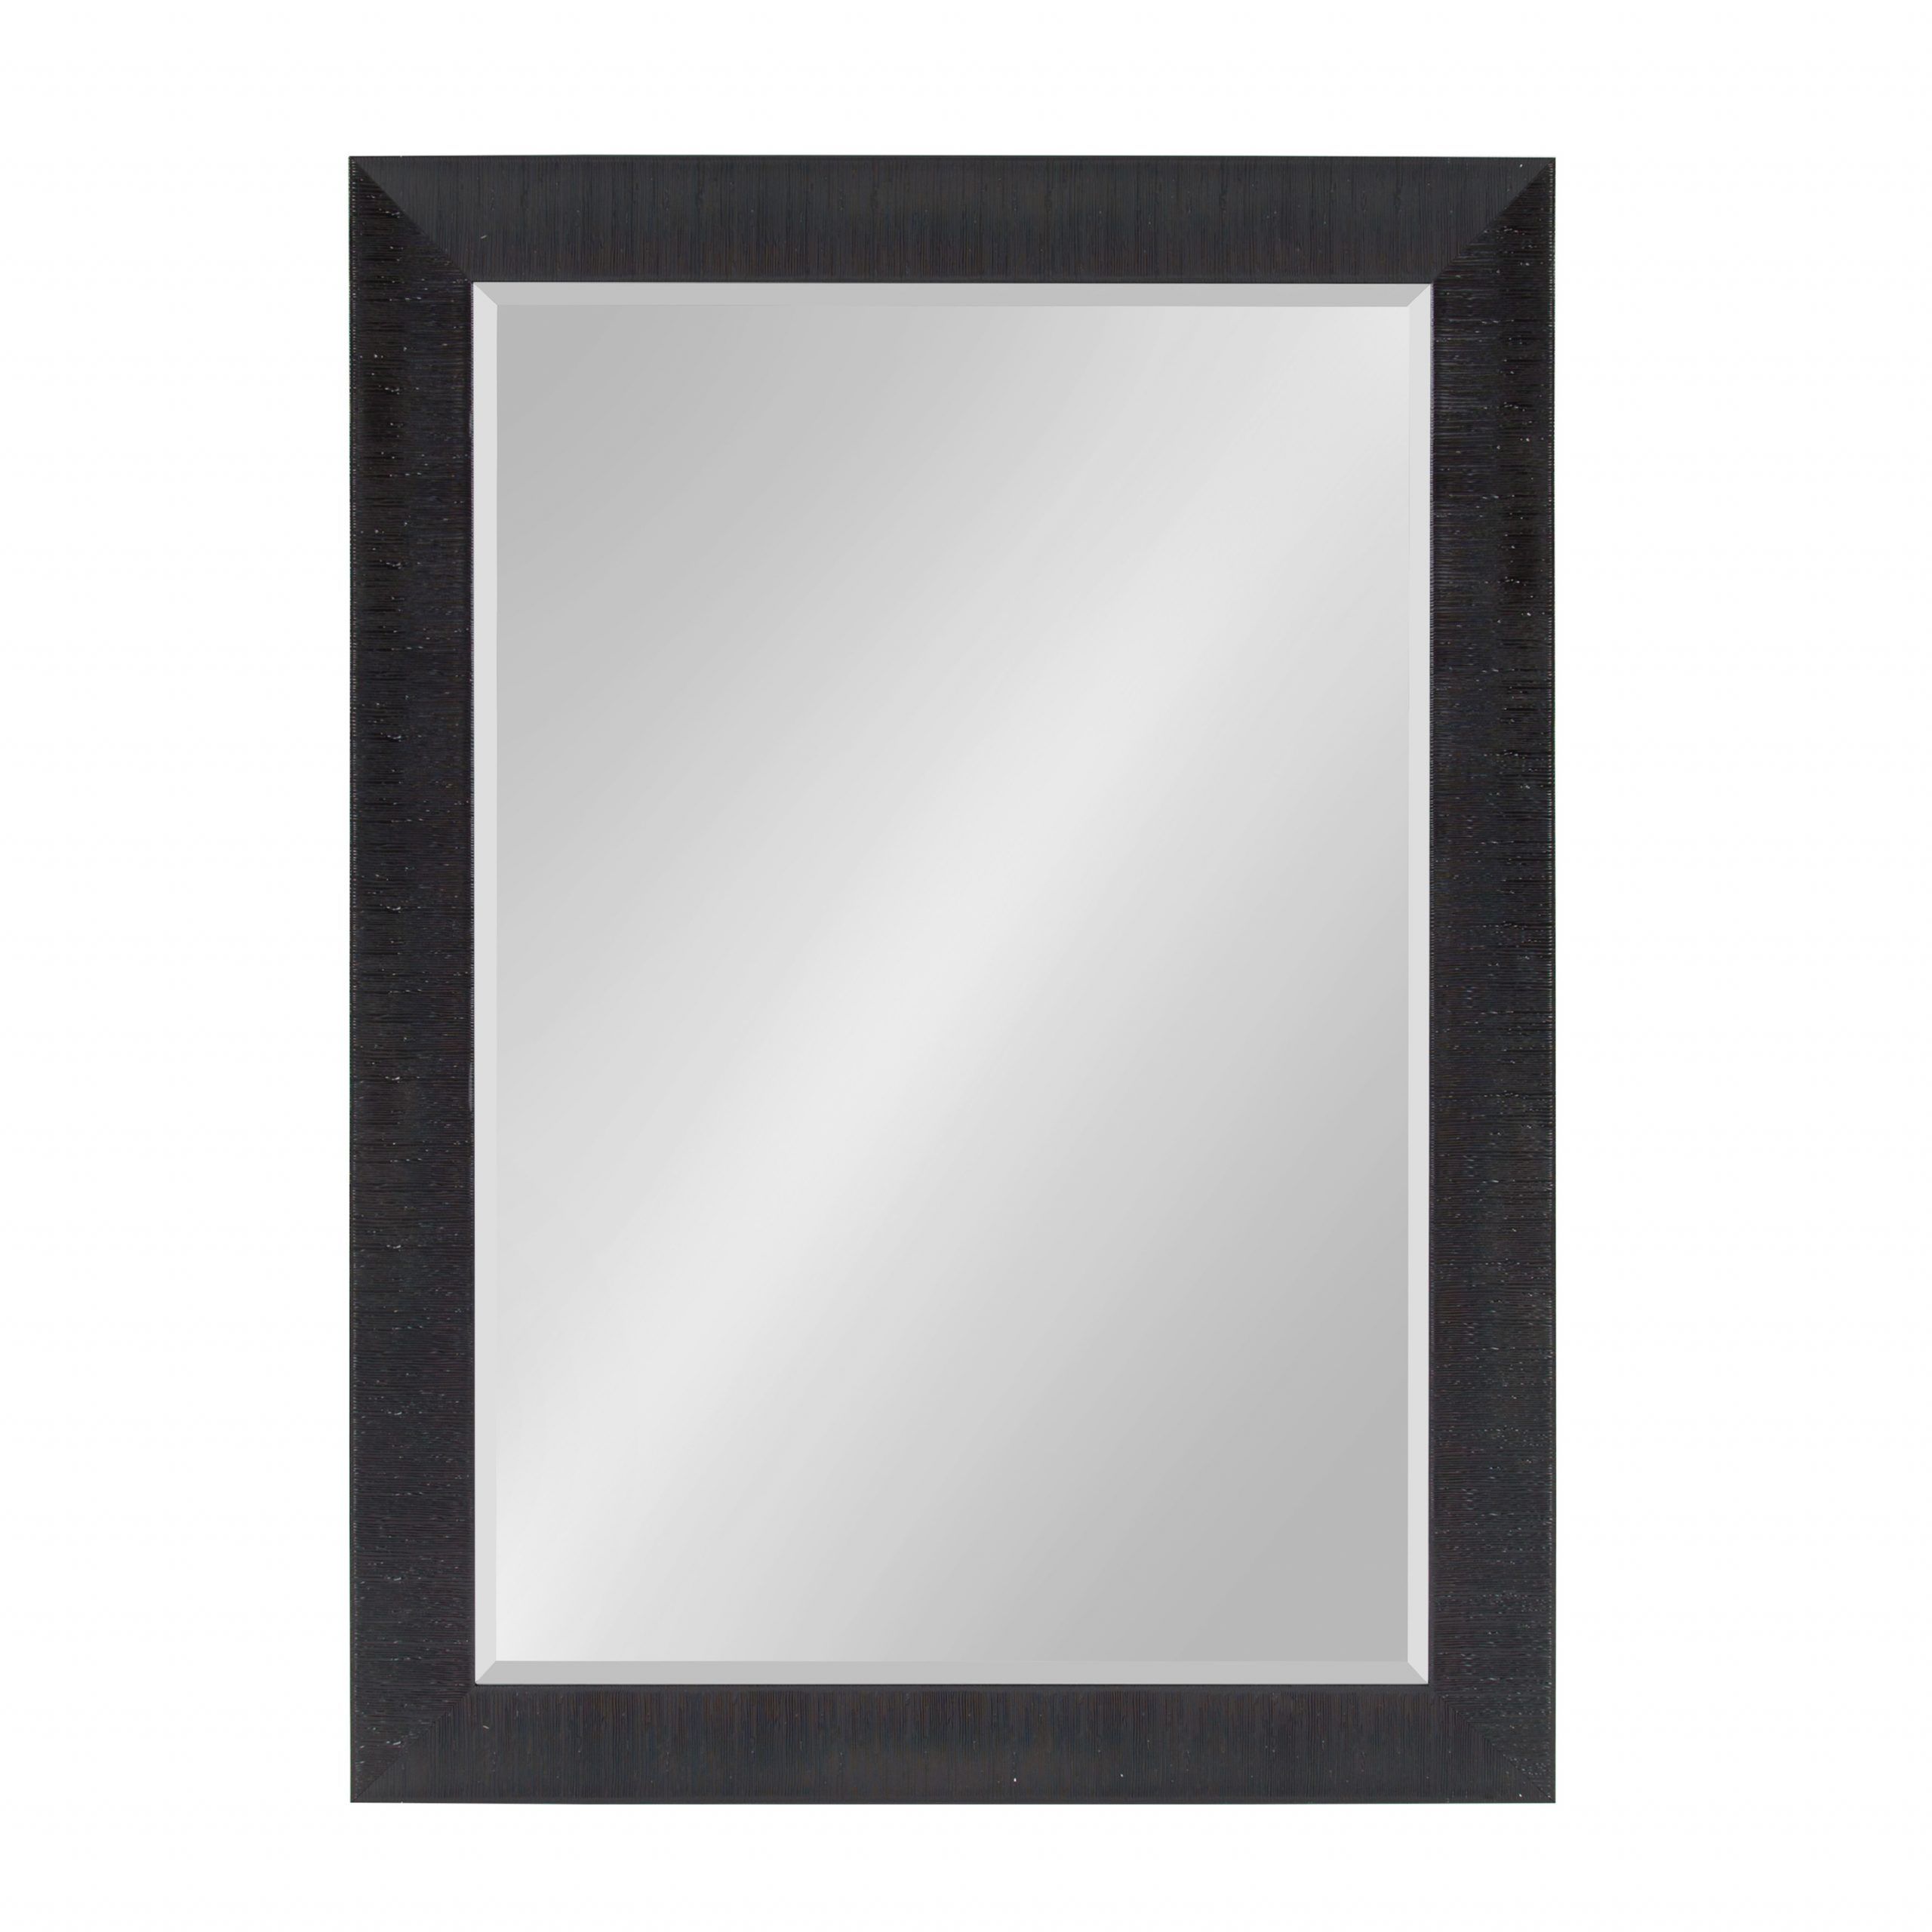 Kate And Laurel – Reyna Large Framed Rectangle Wall Mirror, 30 X 42 Pertaining To Square Oversized Wall Mirrors (View 10 of 15)